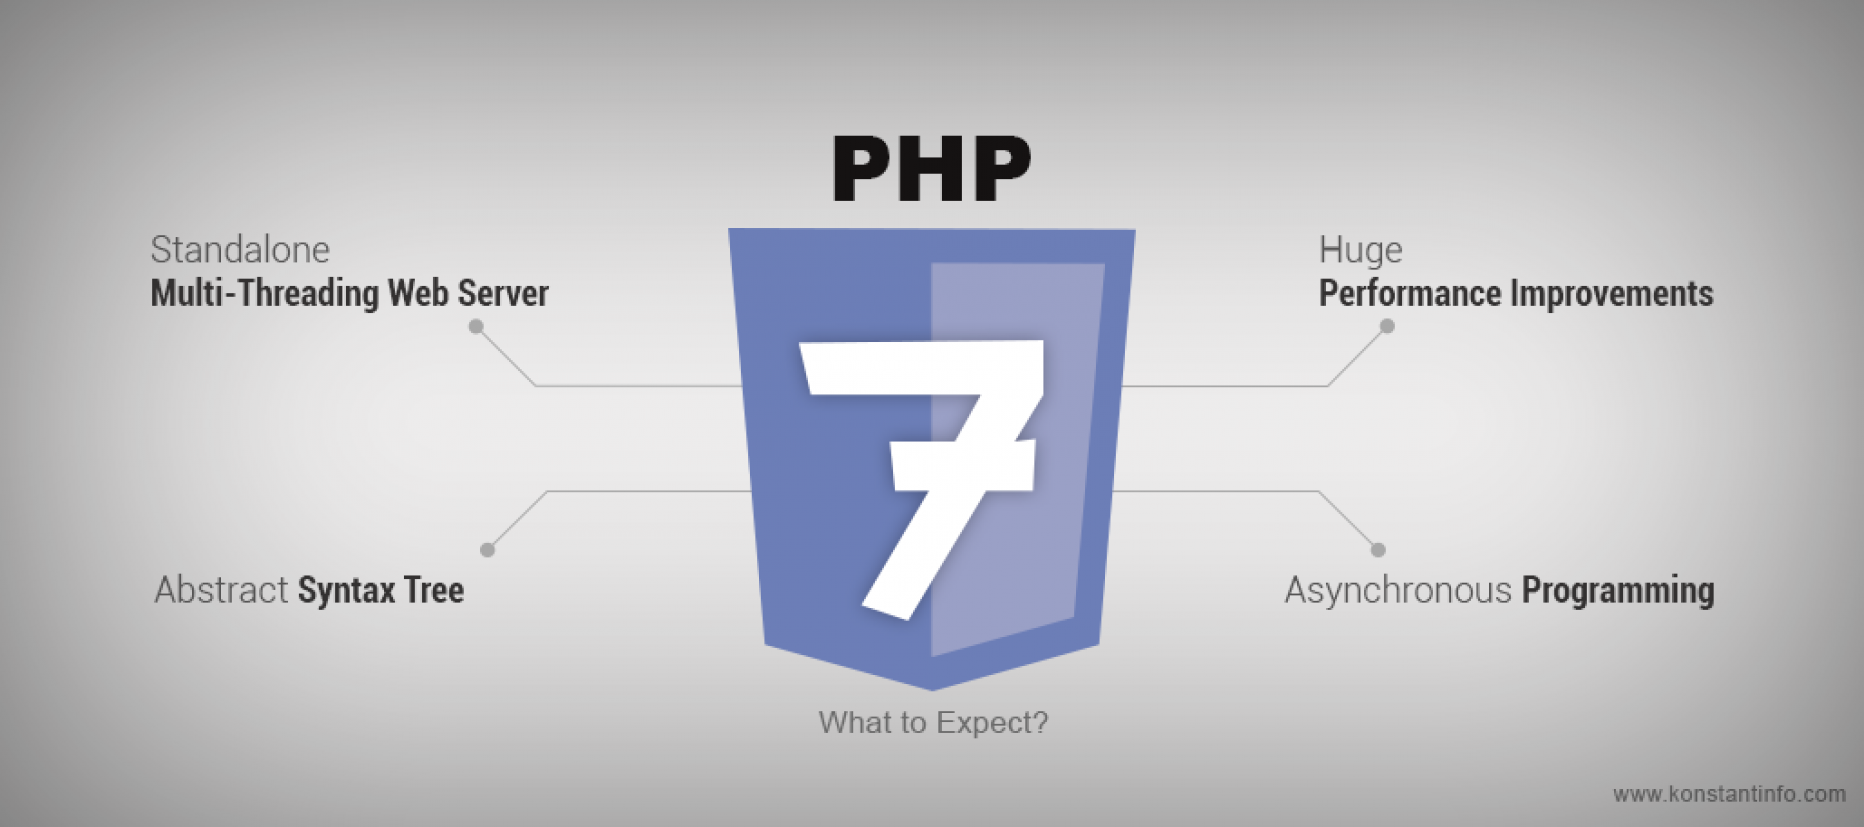 Php последний элемент. Php. Php 7. Php картинка. Значок php.